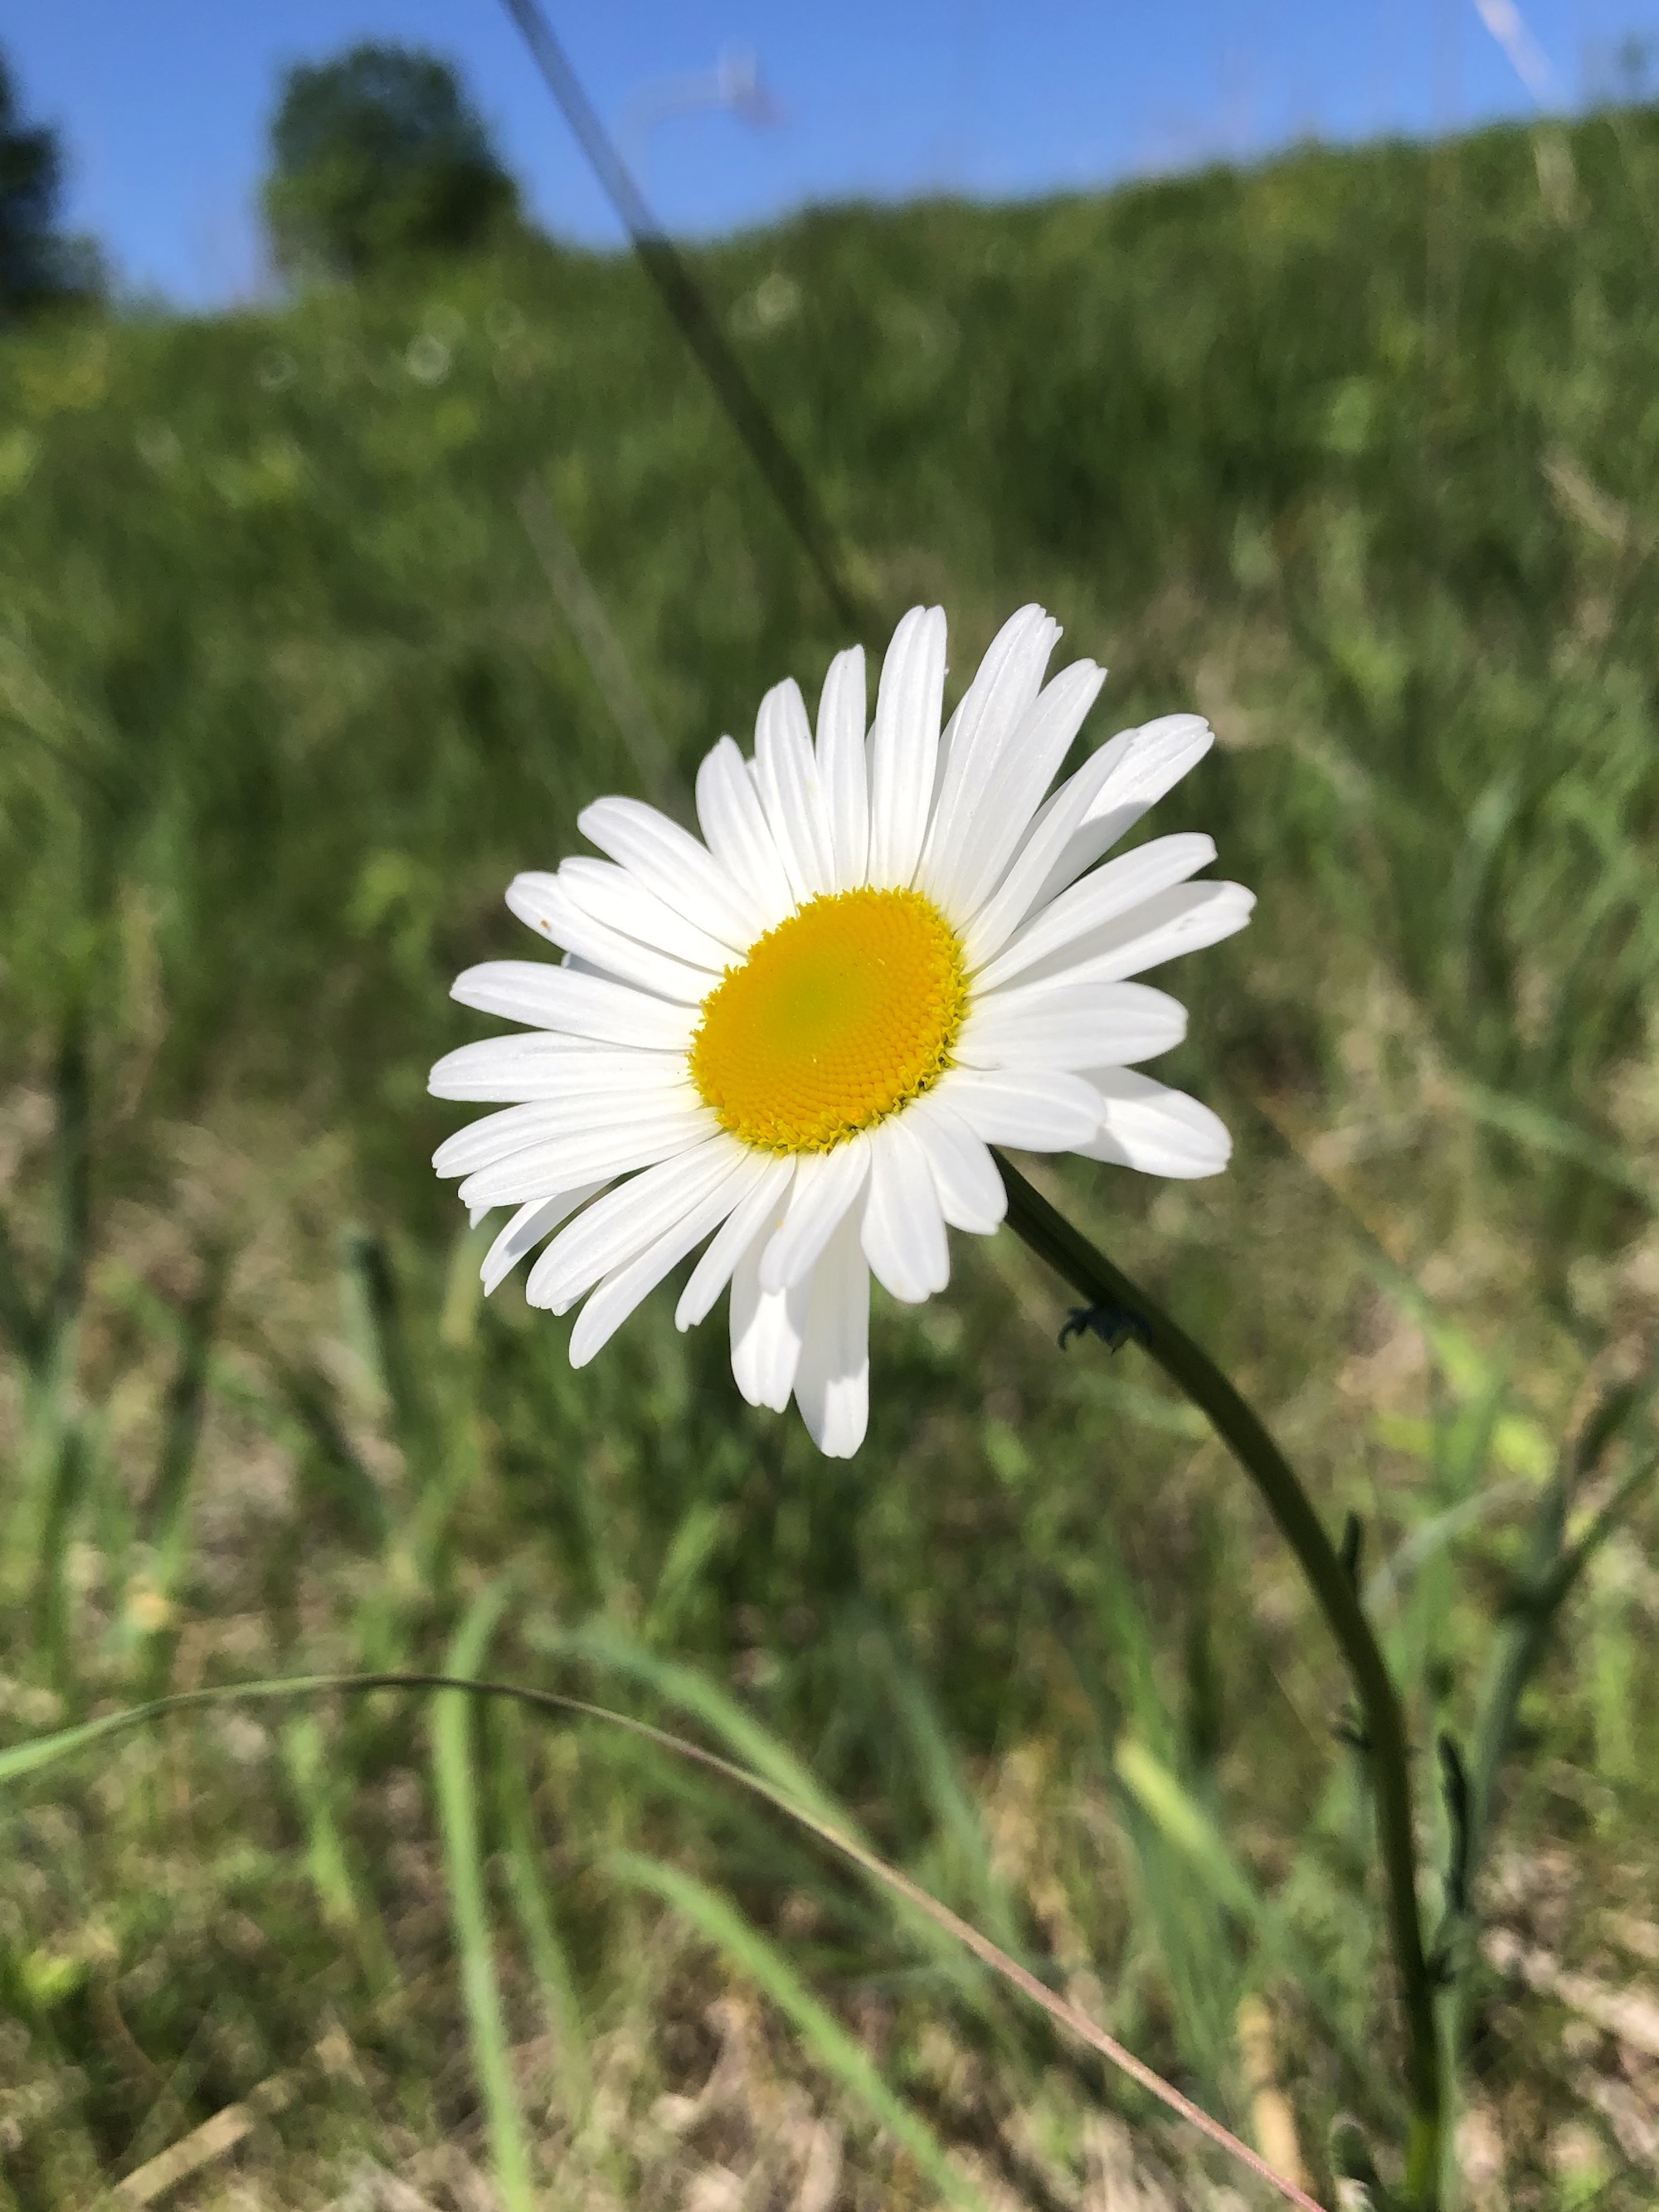 Ox-eye Daisies near Pasque Flower Hill in Madison, Wisconsin on May 26, 2021.